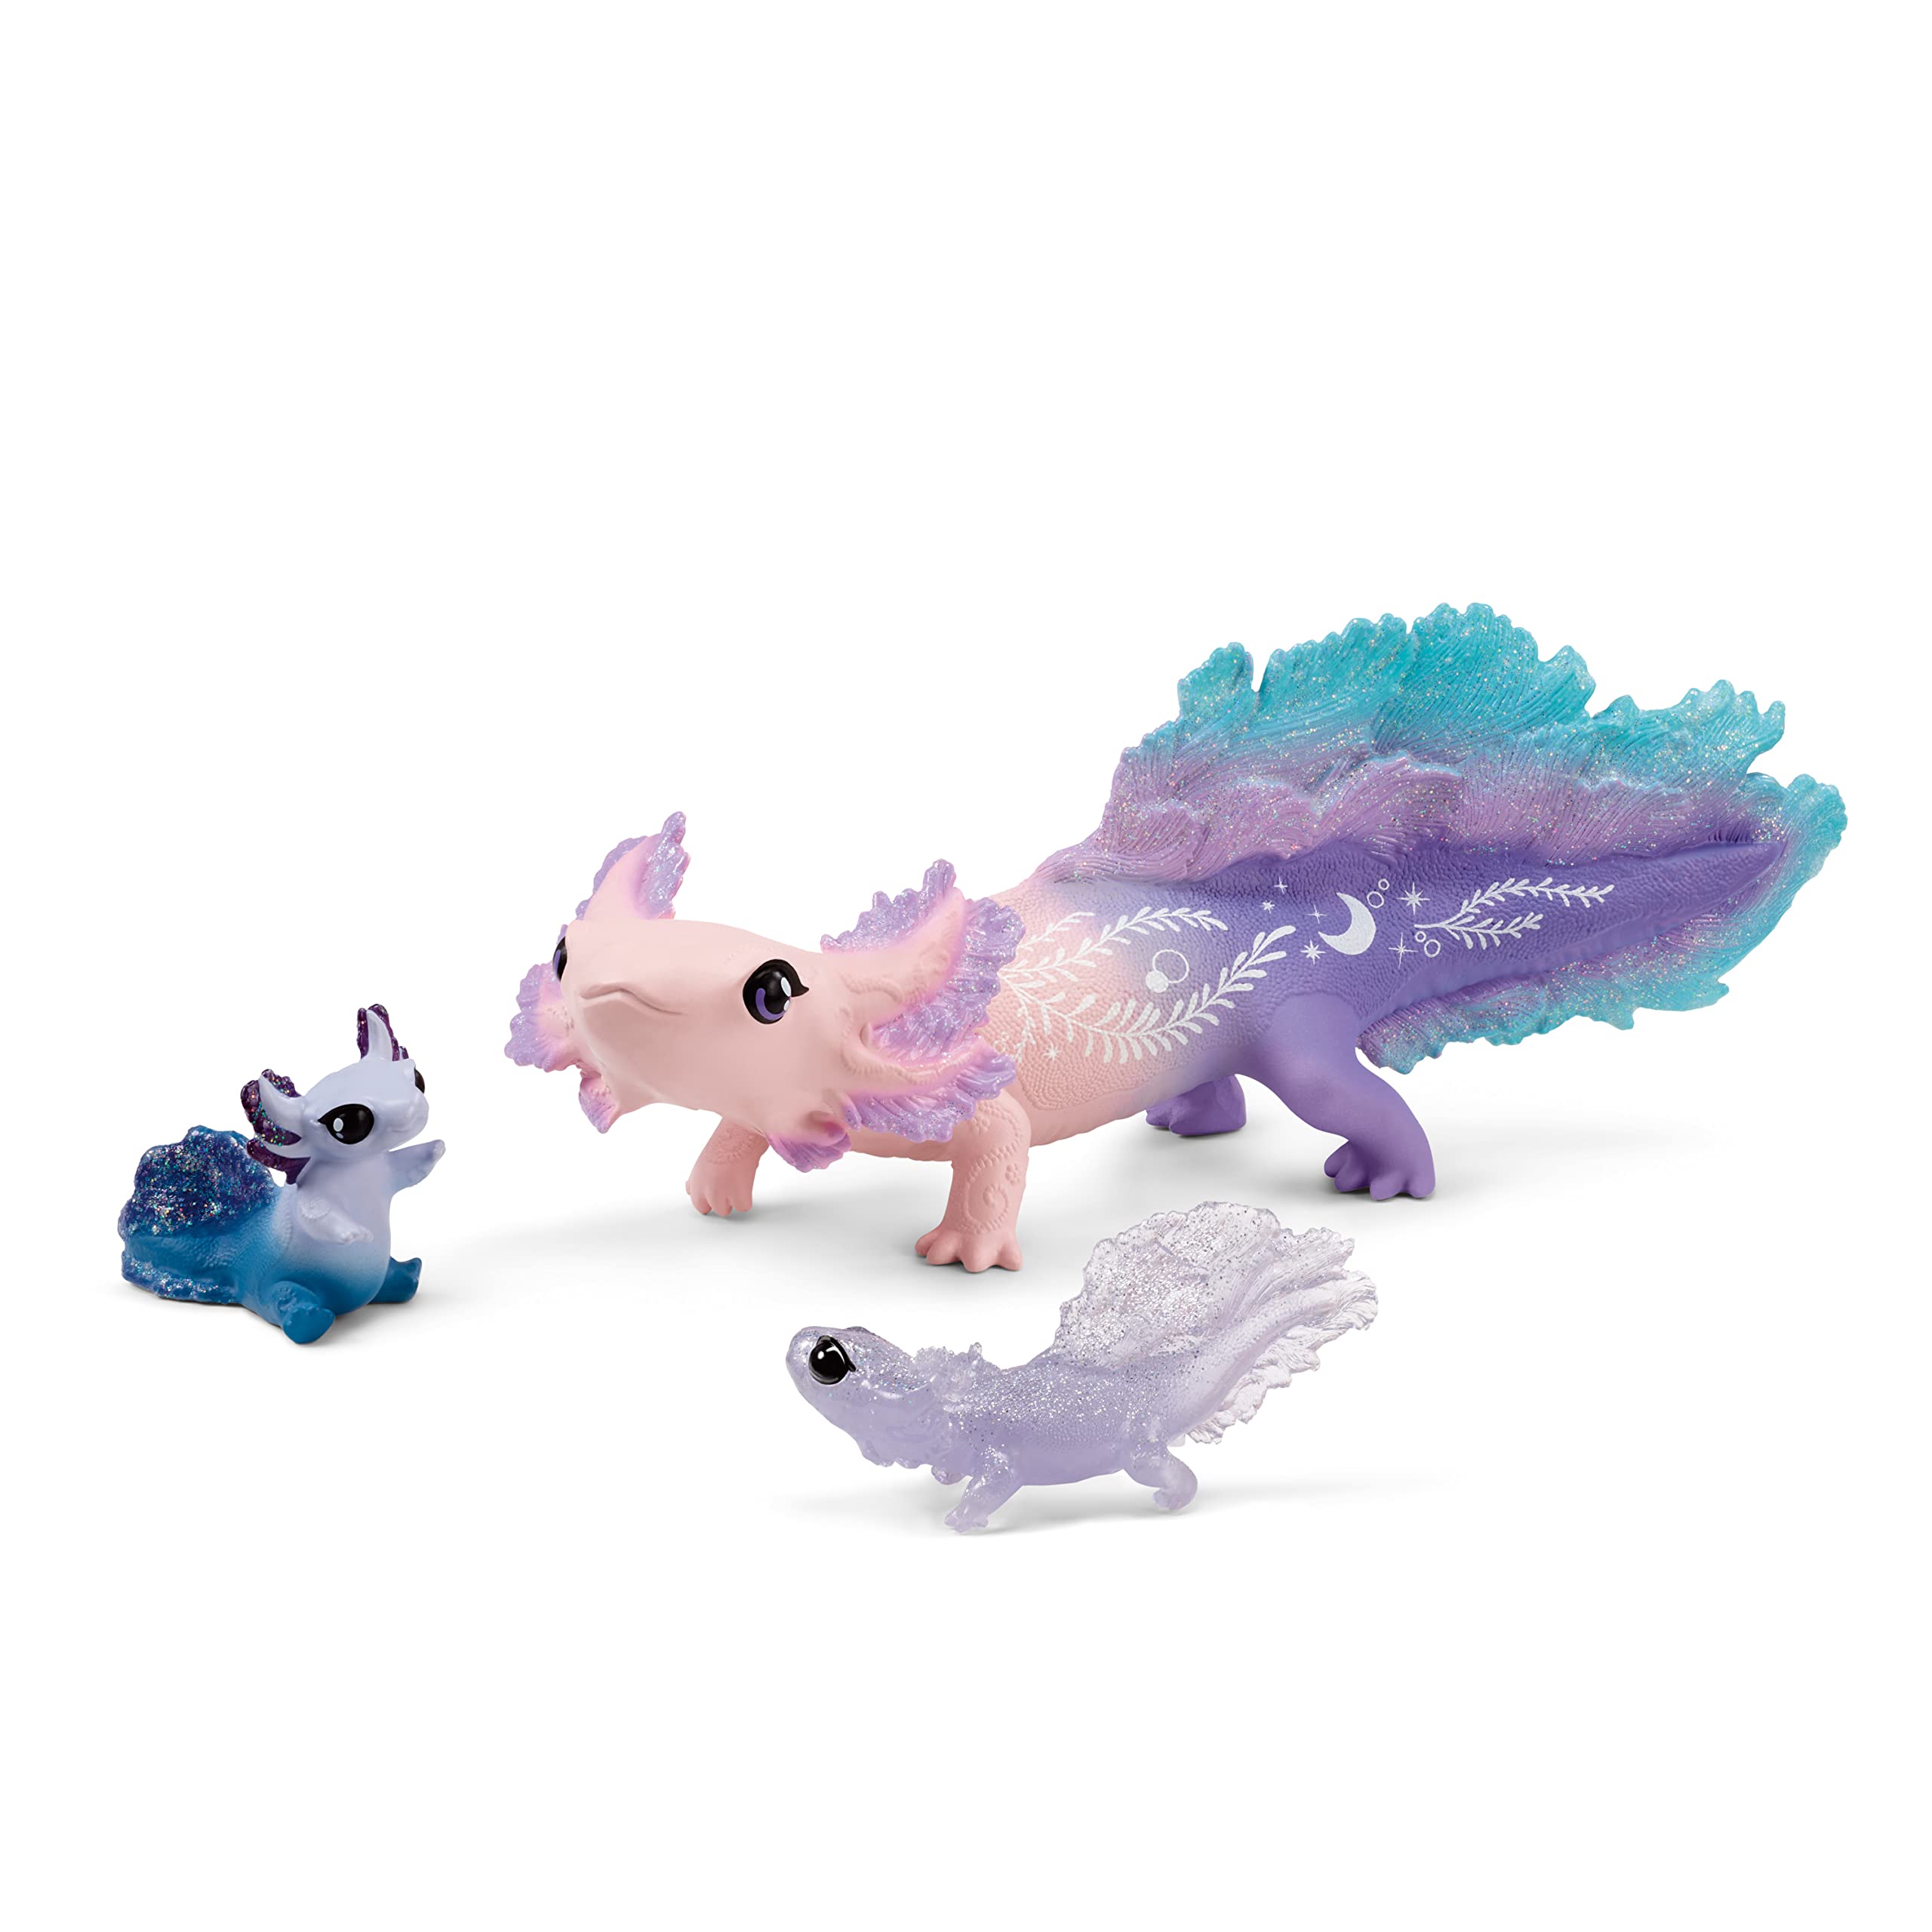 Schleich bayala, 3-Piece Set. Axolotl Salamander Toys for Girls and Boys, Axolotl Discovery Playset with Mom and Babies, Ages 5+